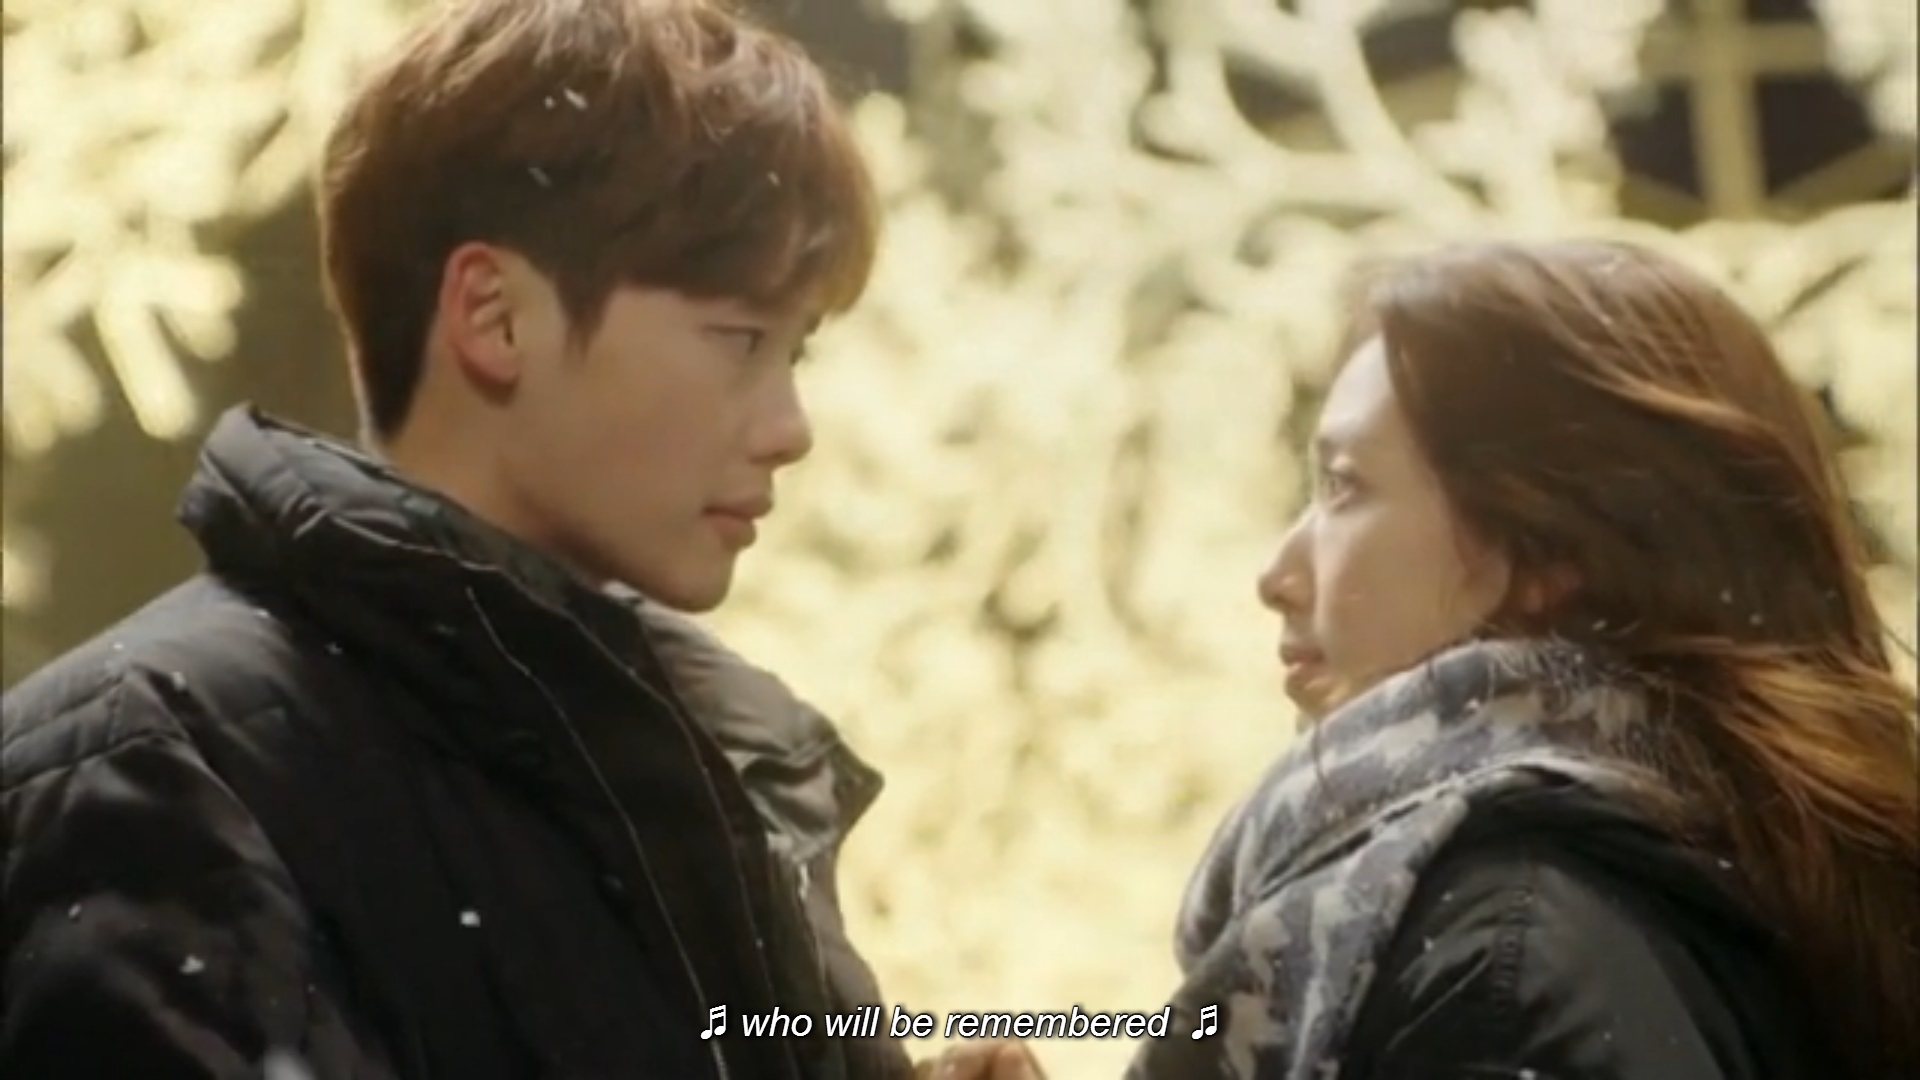 Pinocchio episode 8 Review: My Thoughts